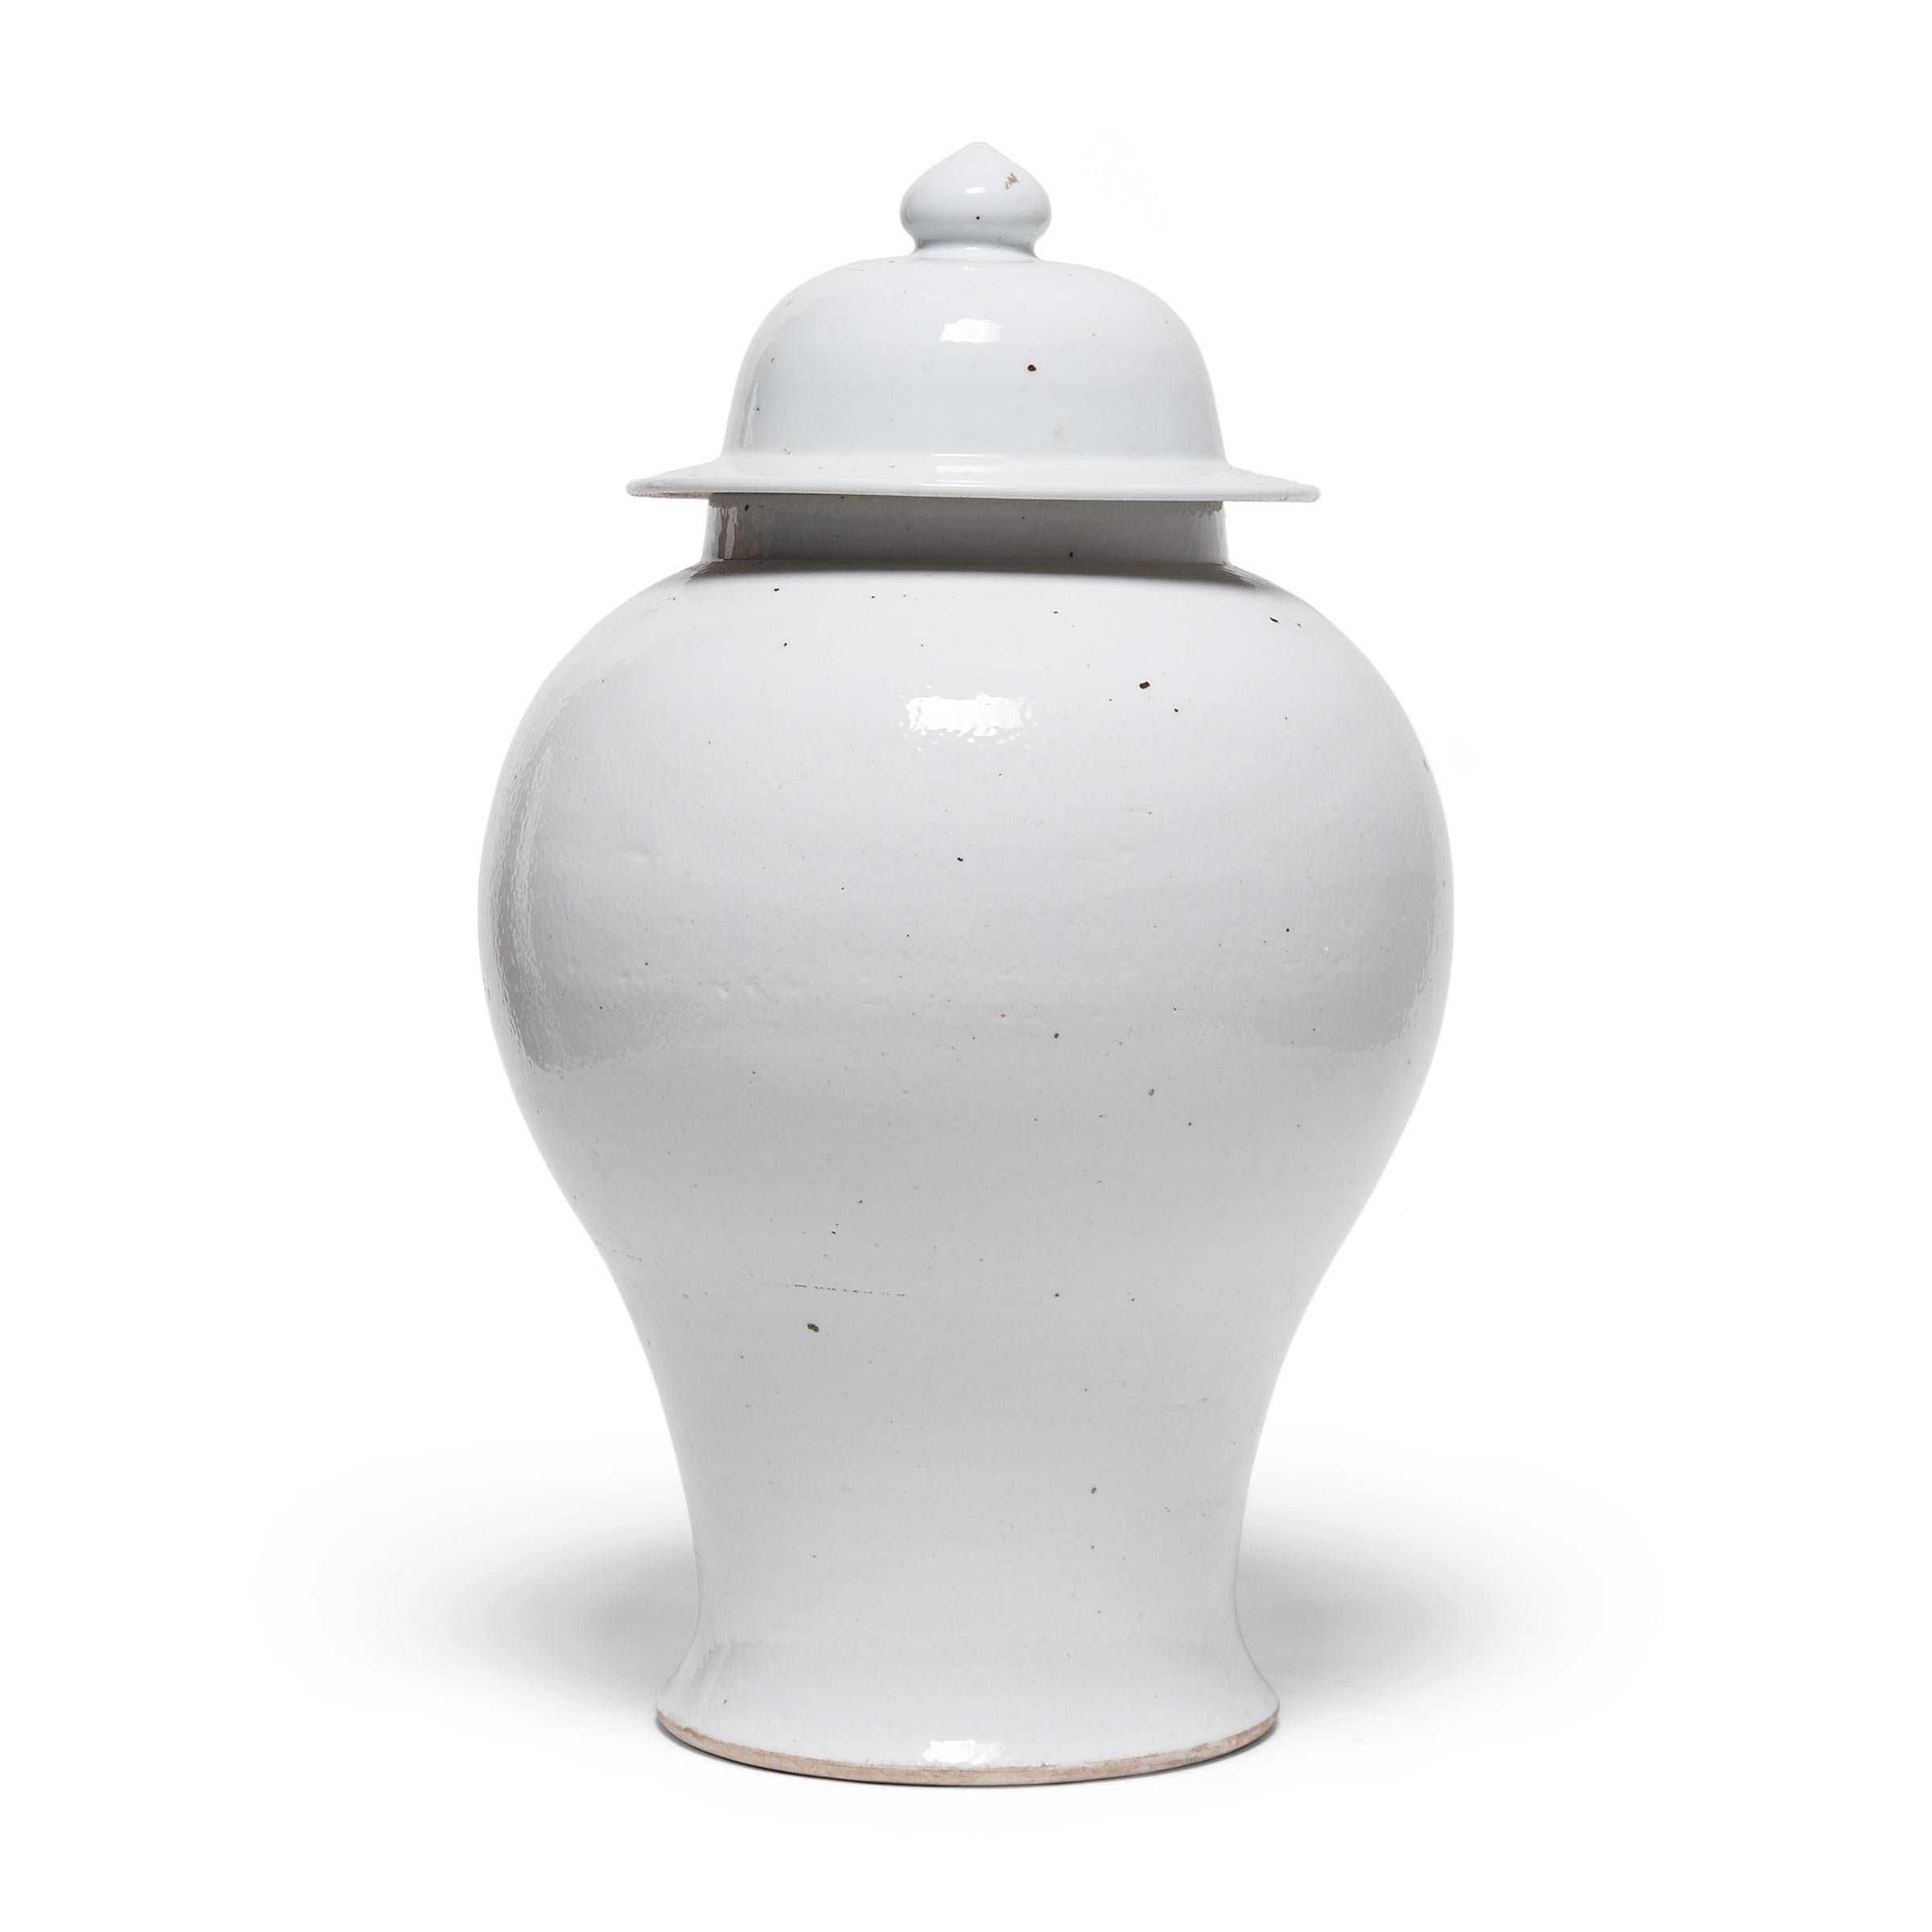 Defined by its rounded body, high shoulders, and domed lid, the time-honored baluster jar form takes on a streamlined look in this modern interpretation. Traditionally elaborately decorated, this contemporary ginger jar is cloaked in a monochrome,